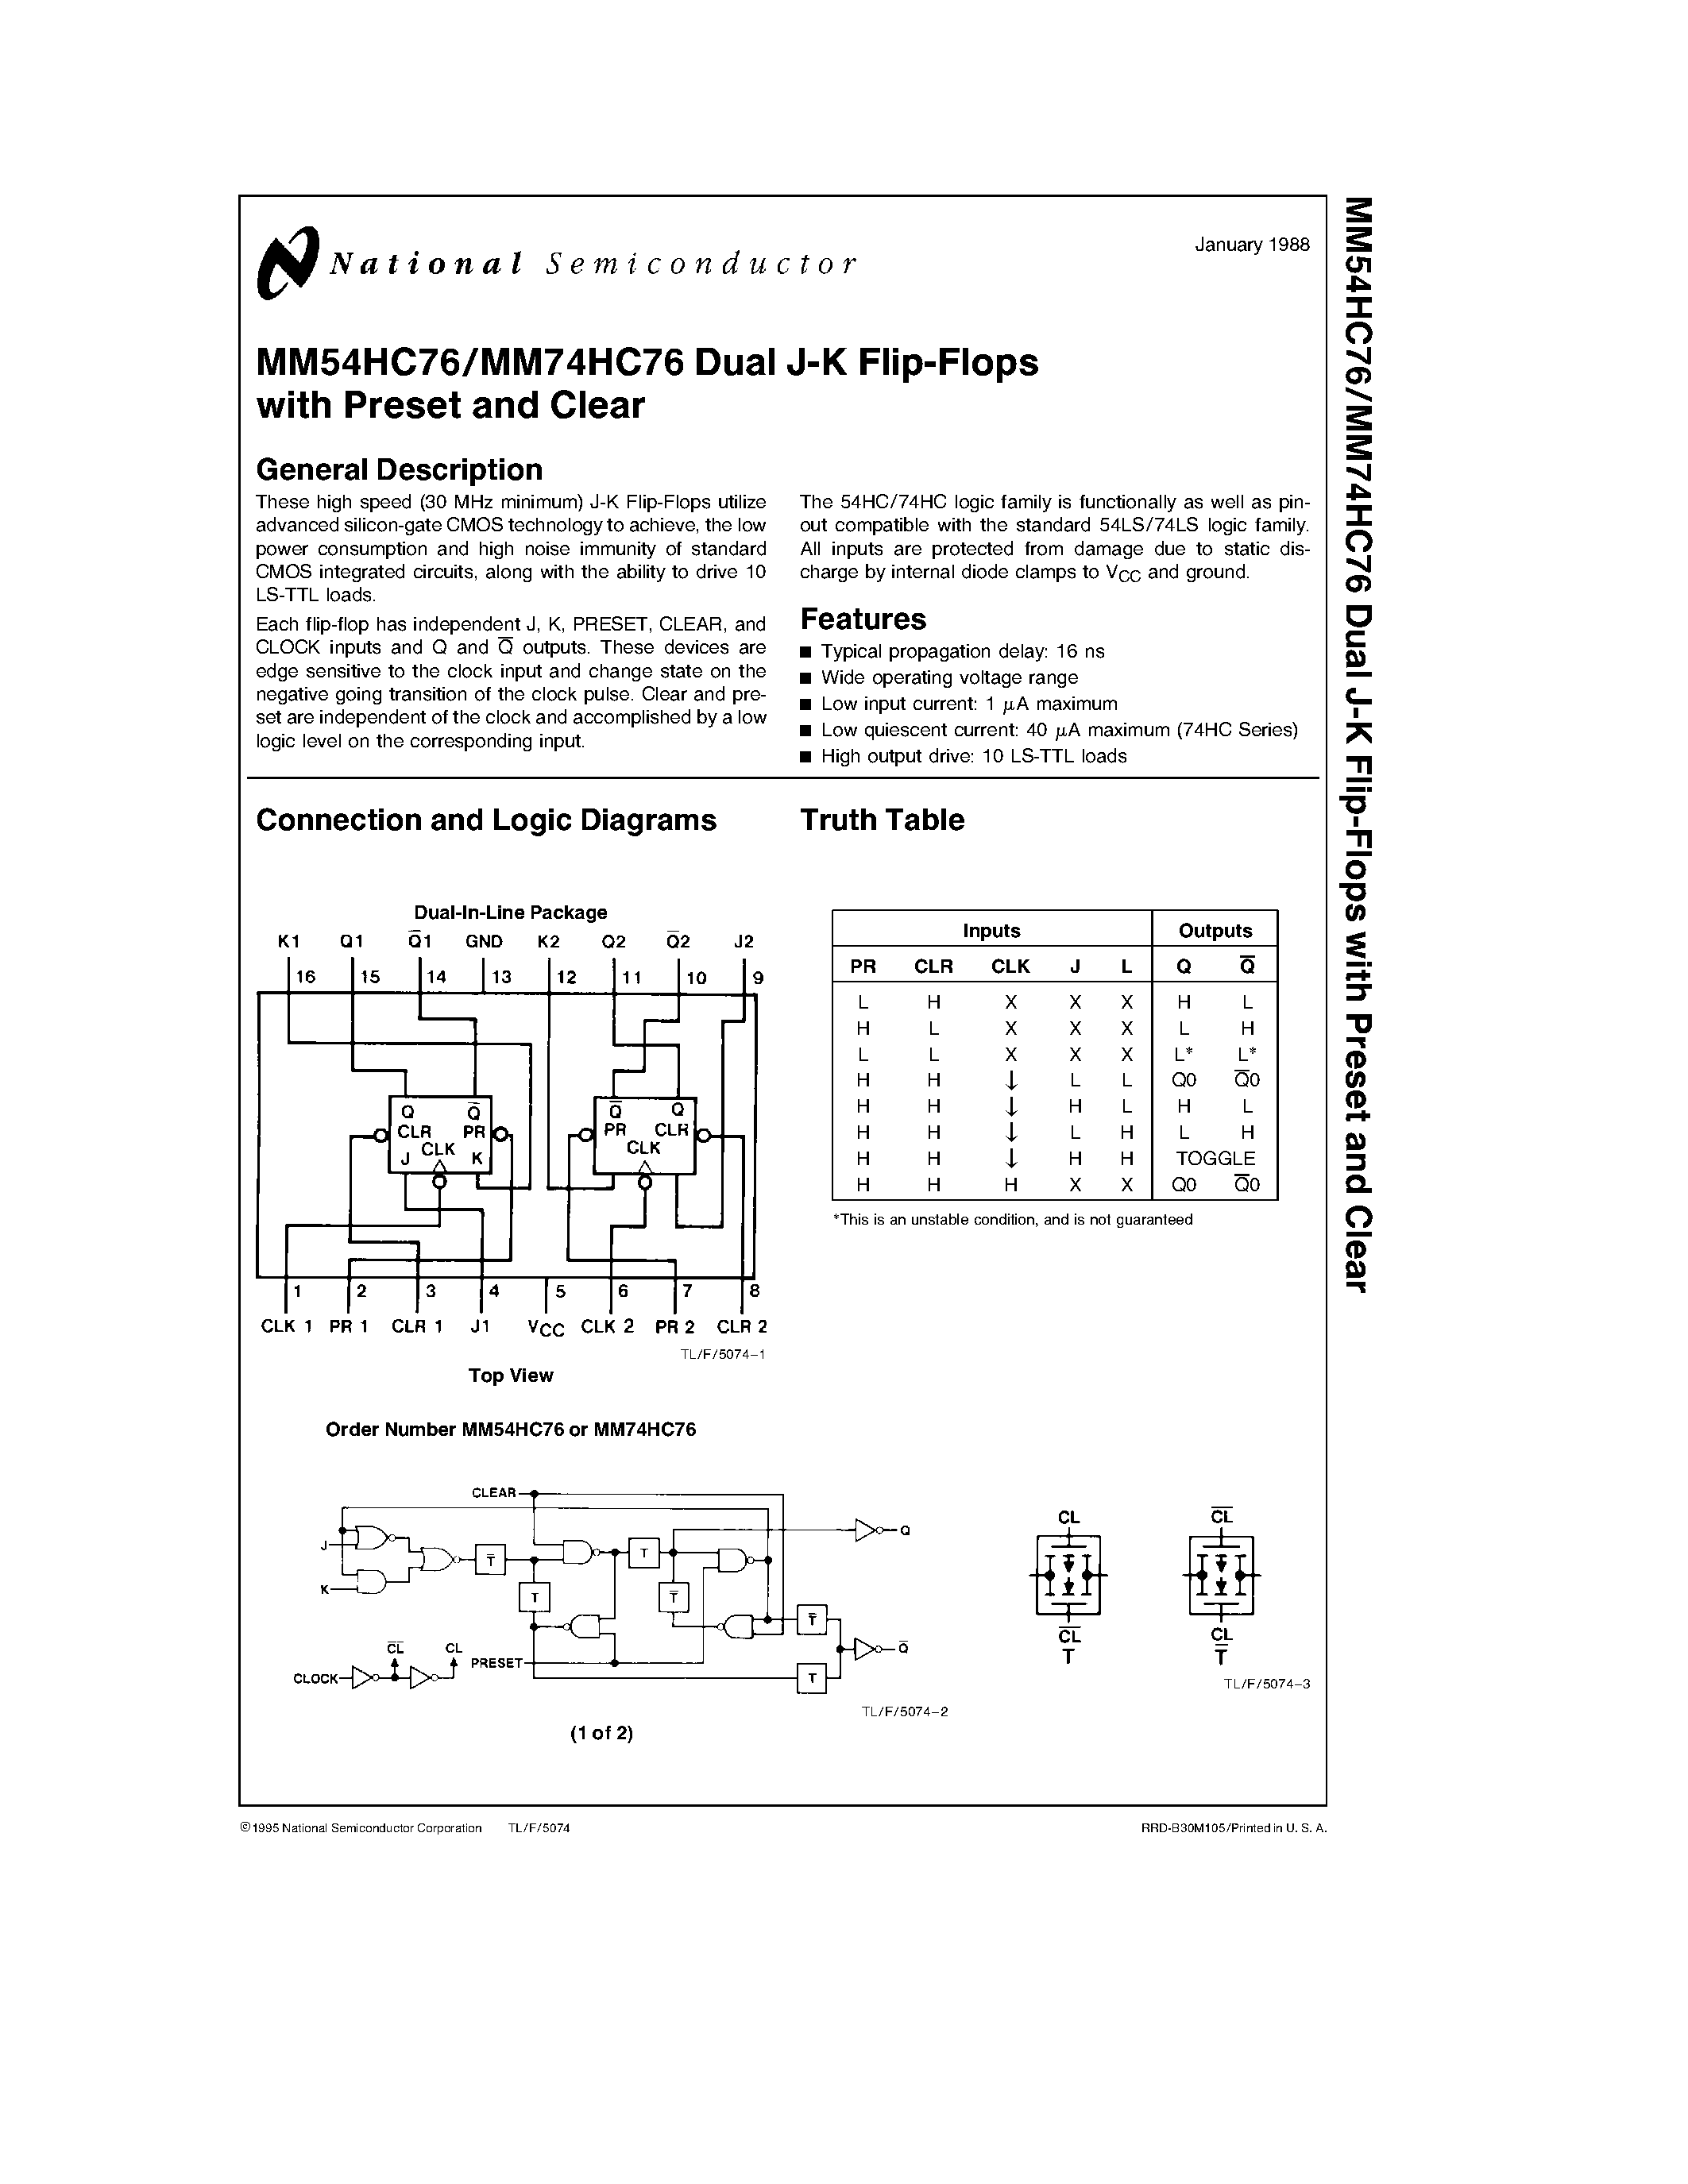 Datasheet MM54HC76 - Dual J-K Flip-Flops with Preset and Clear page 1